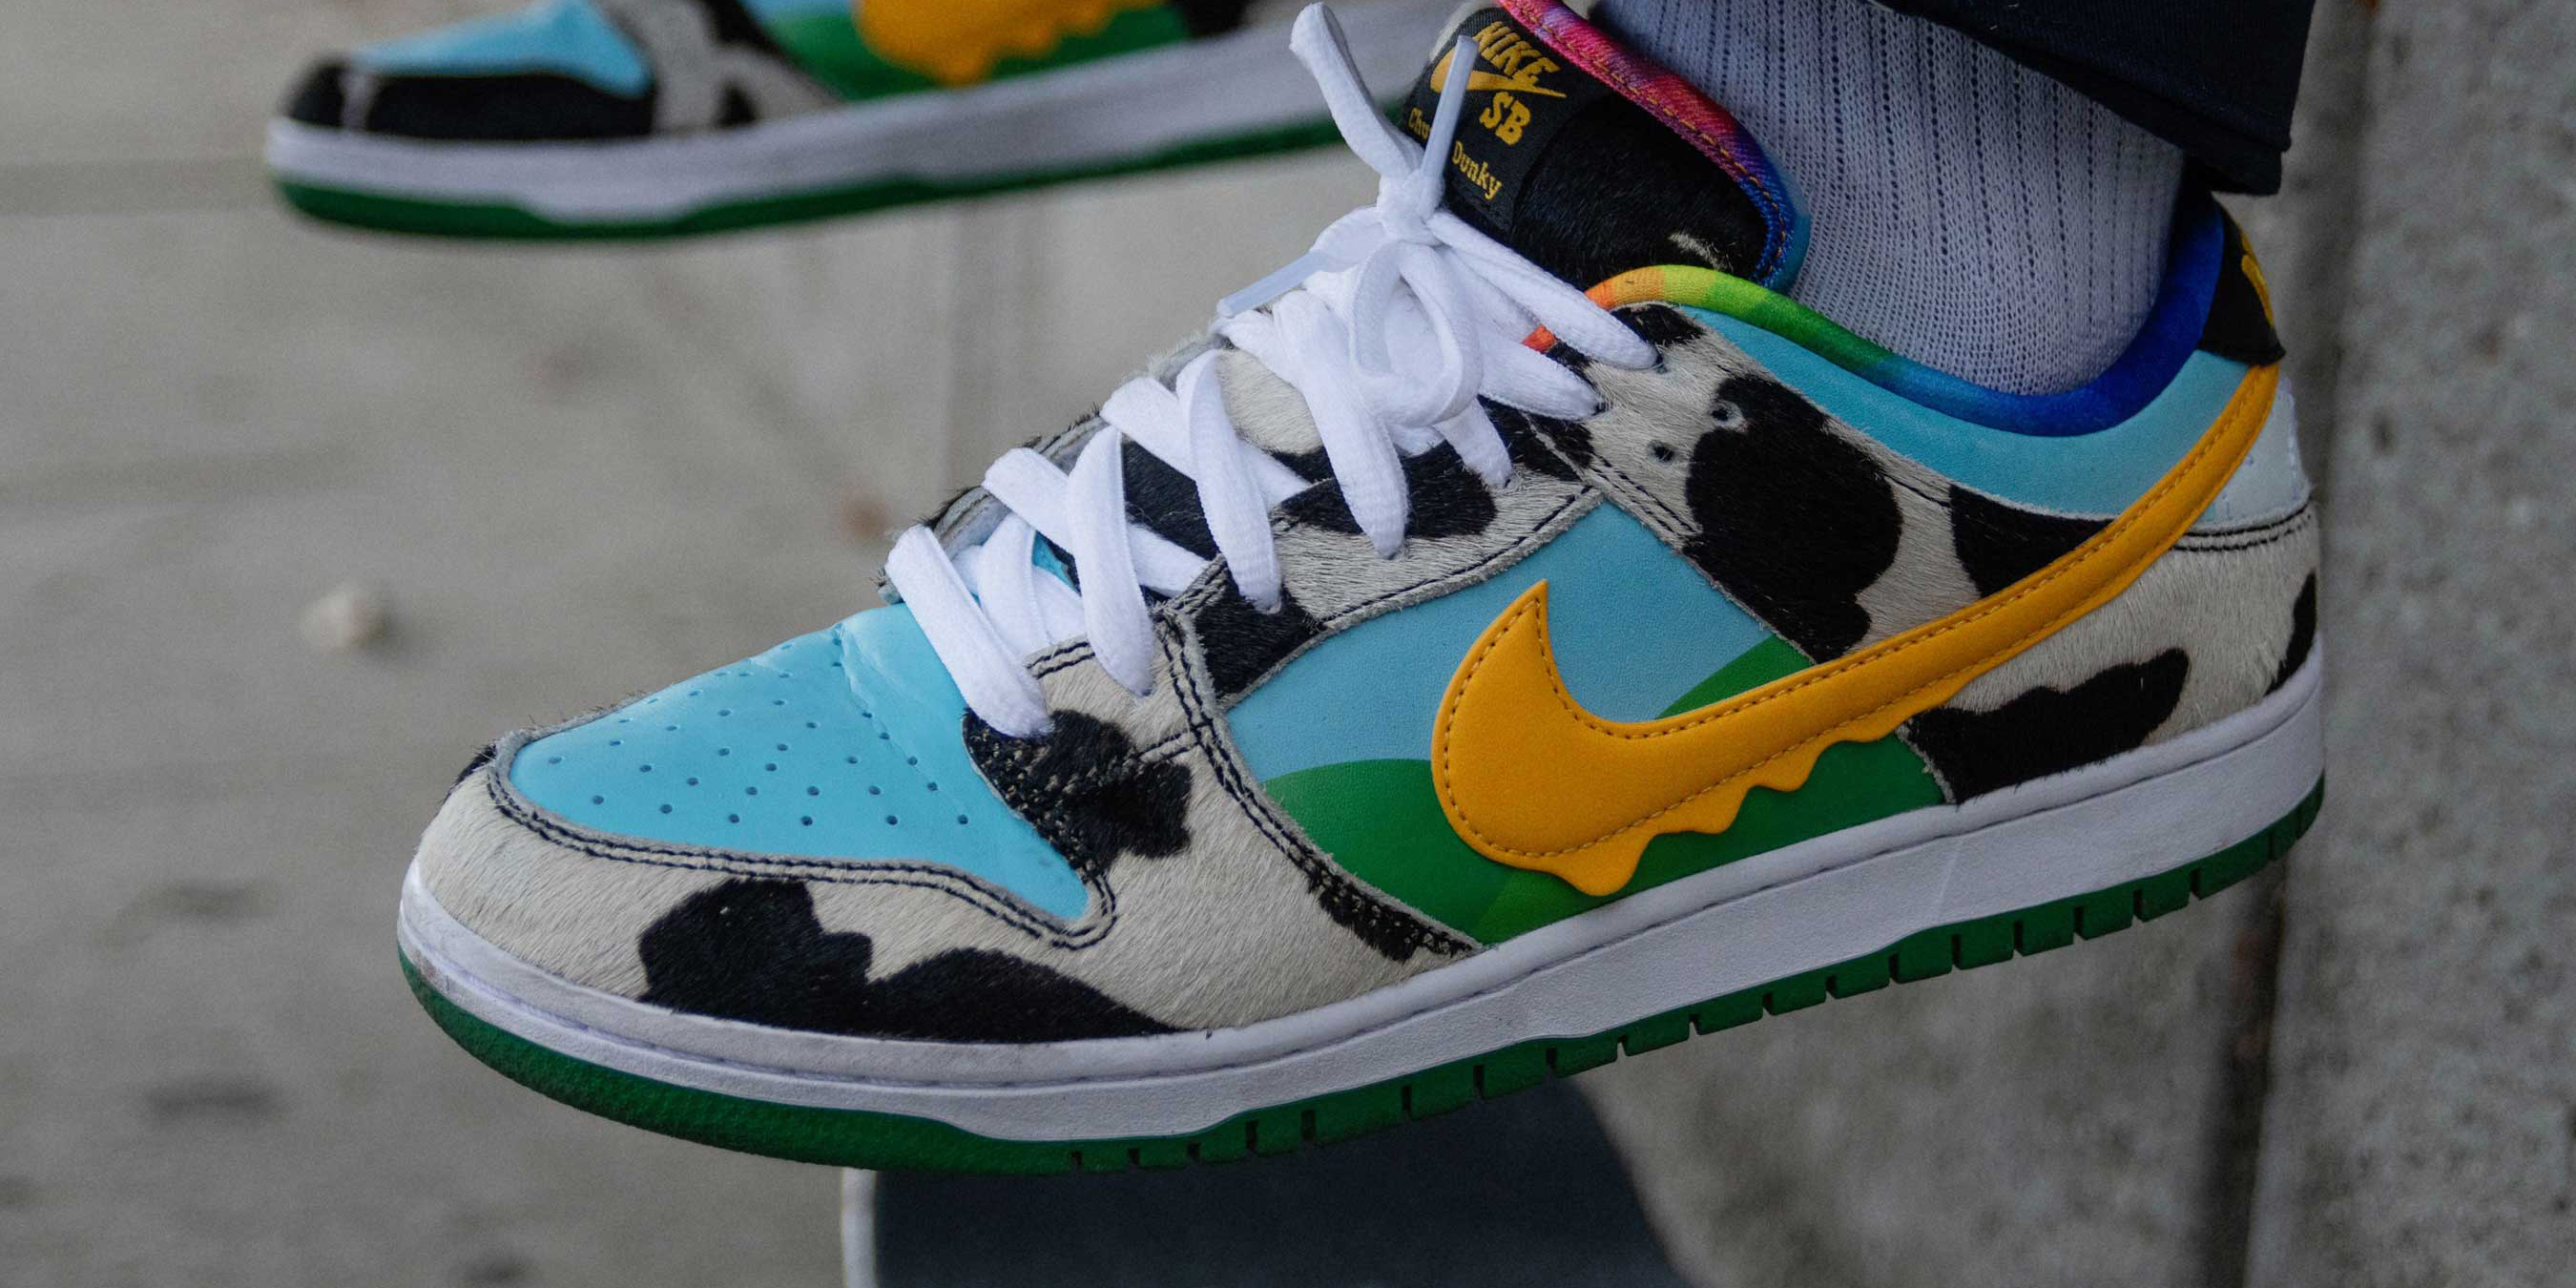 Nike SB collabs with Ben \u0026 Jerry's for 